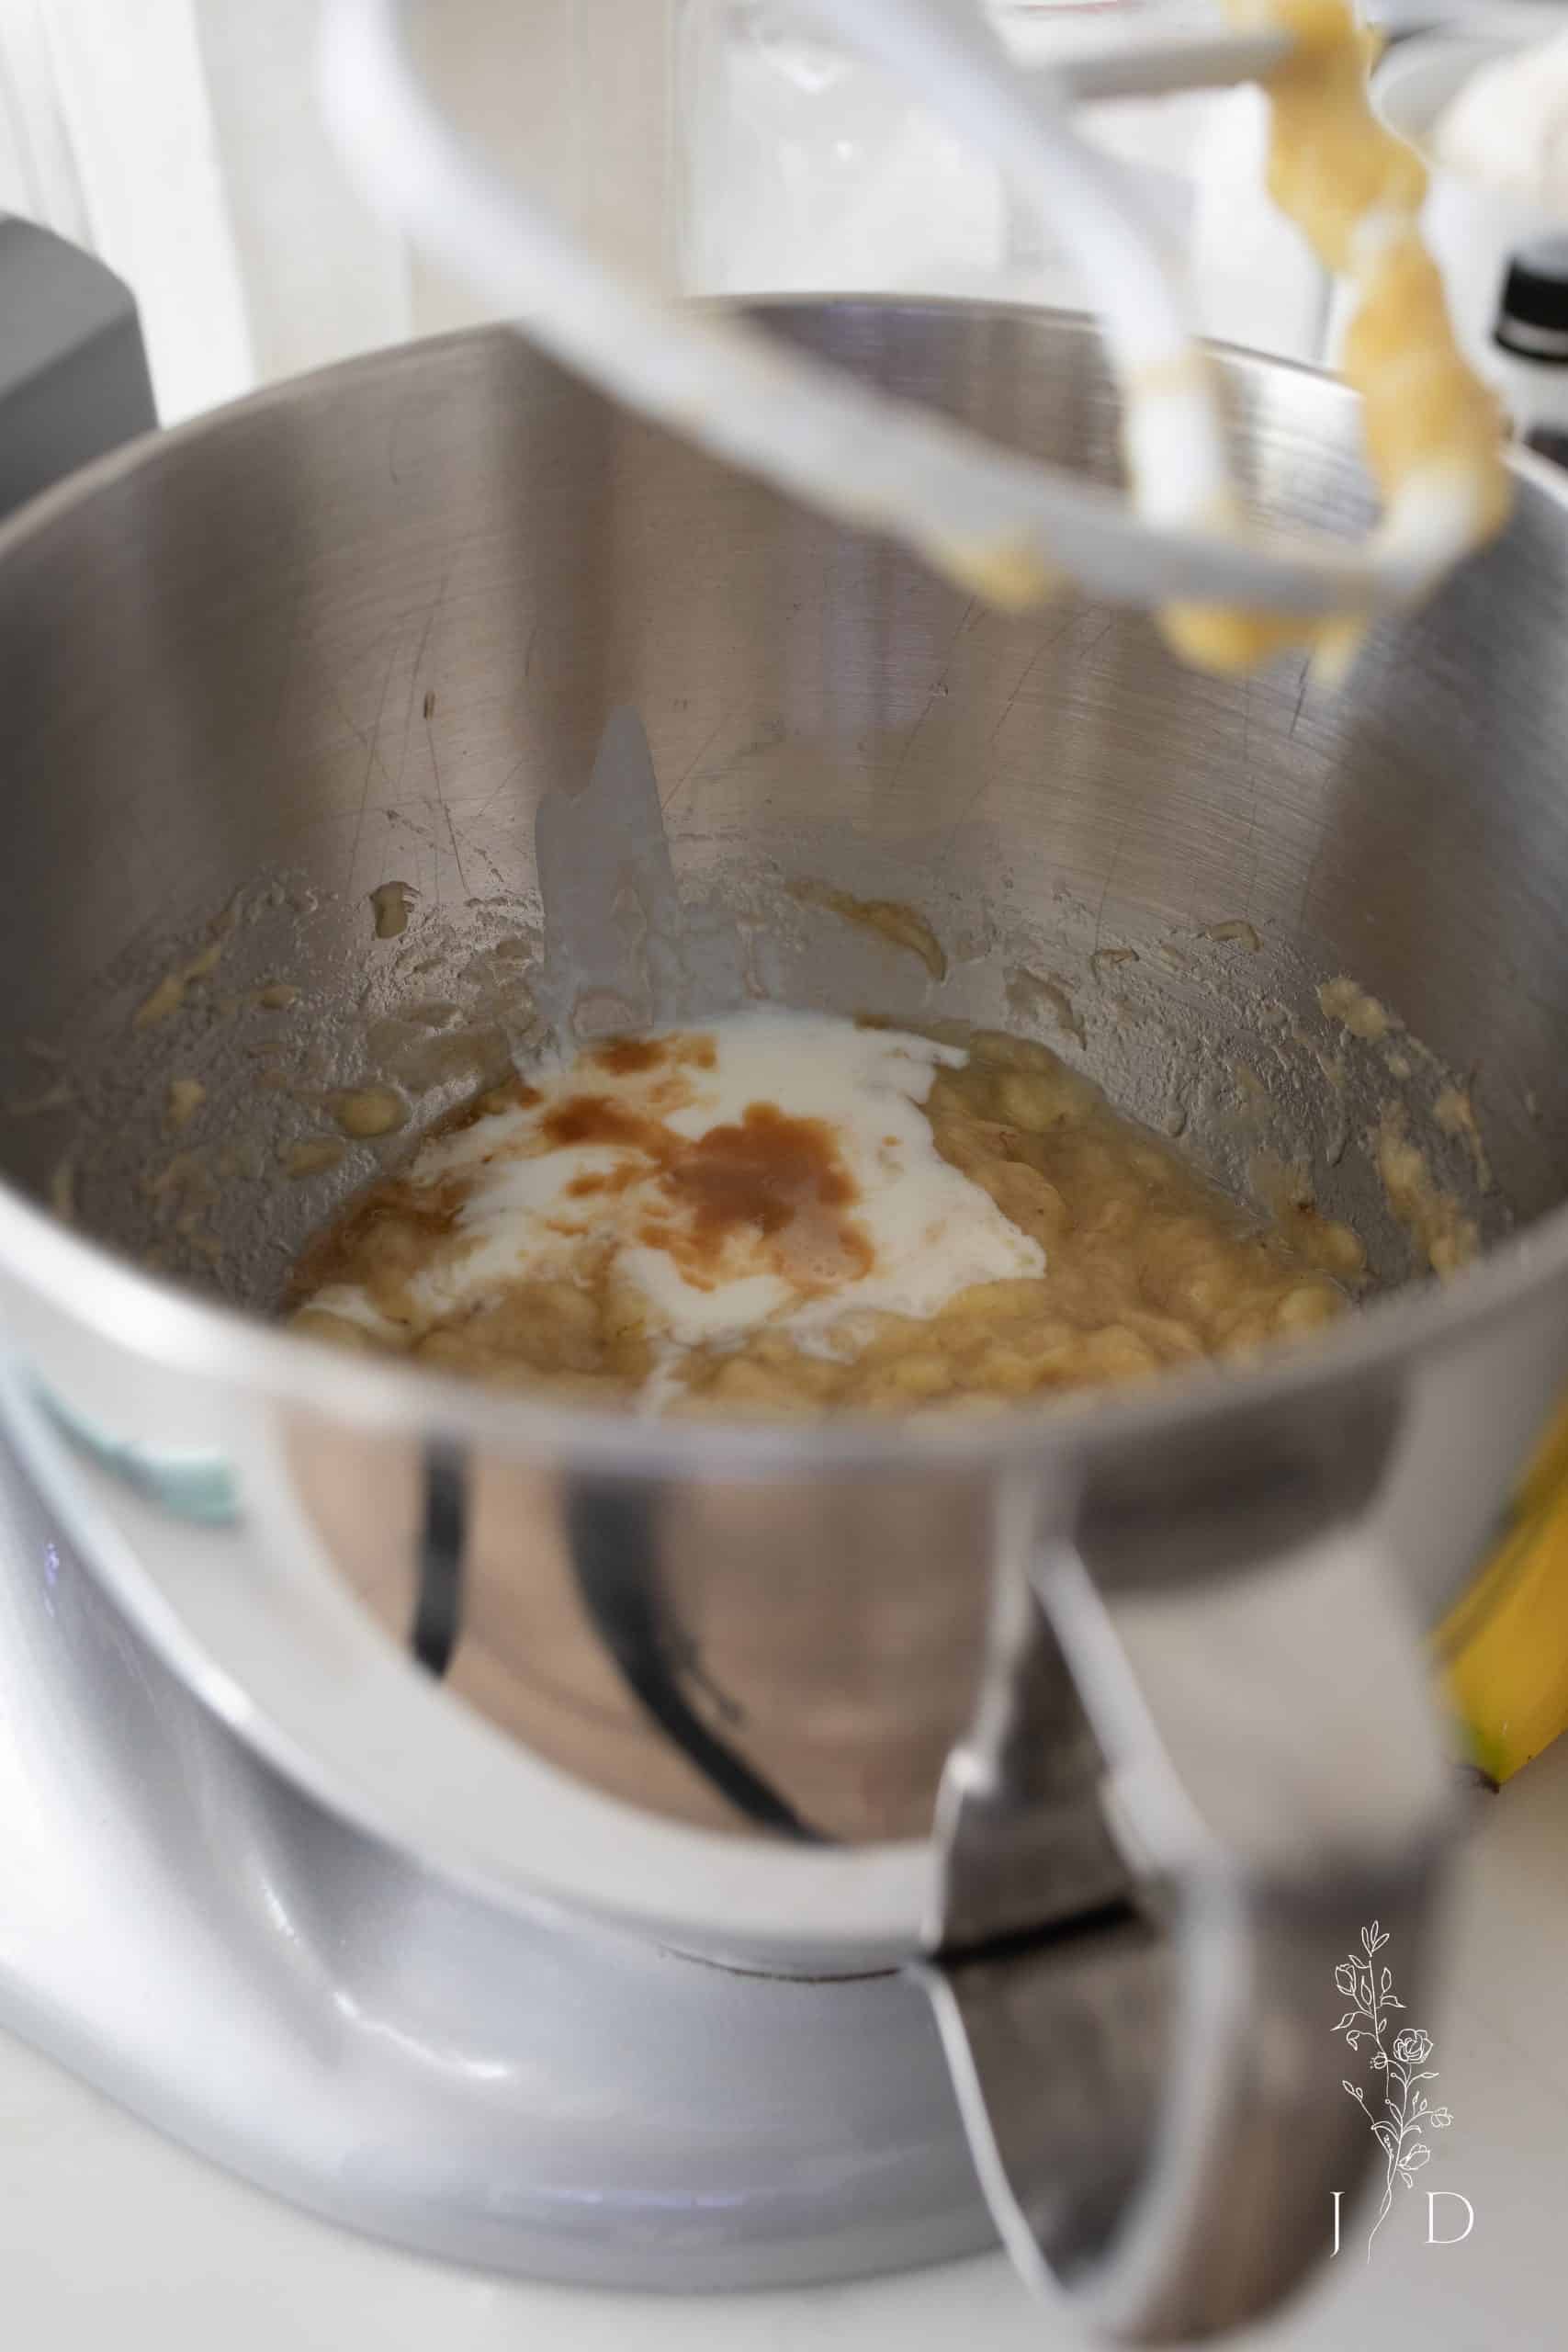 Mixing ingredients to make banana cake from scratch.